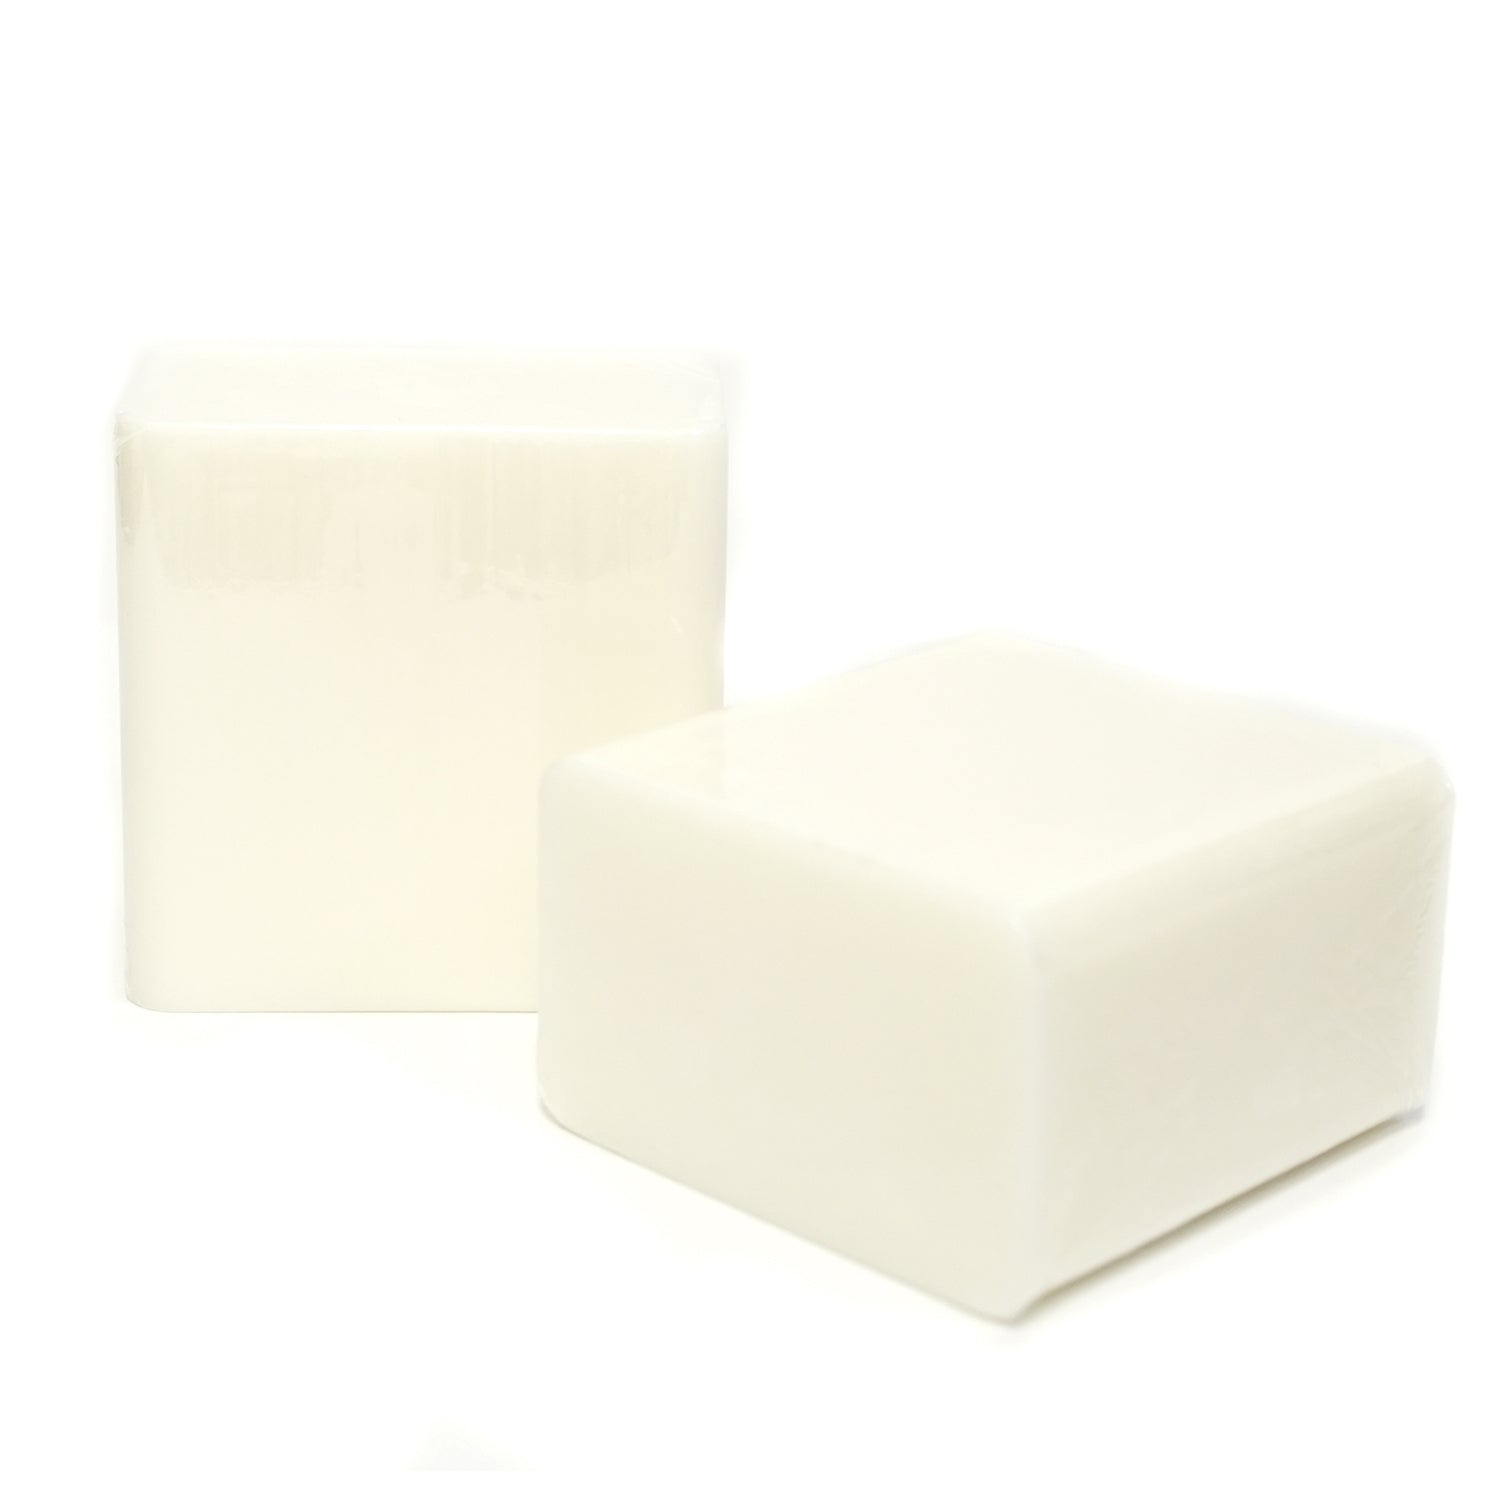 NATURAL Clear Soap Base - 2lb Blocks for only $6.85 at Aztec